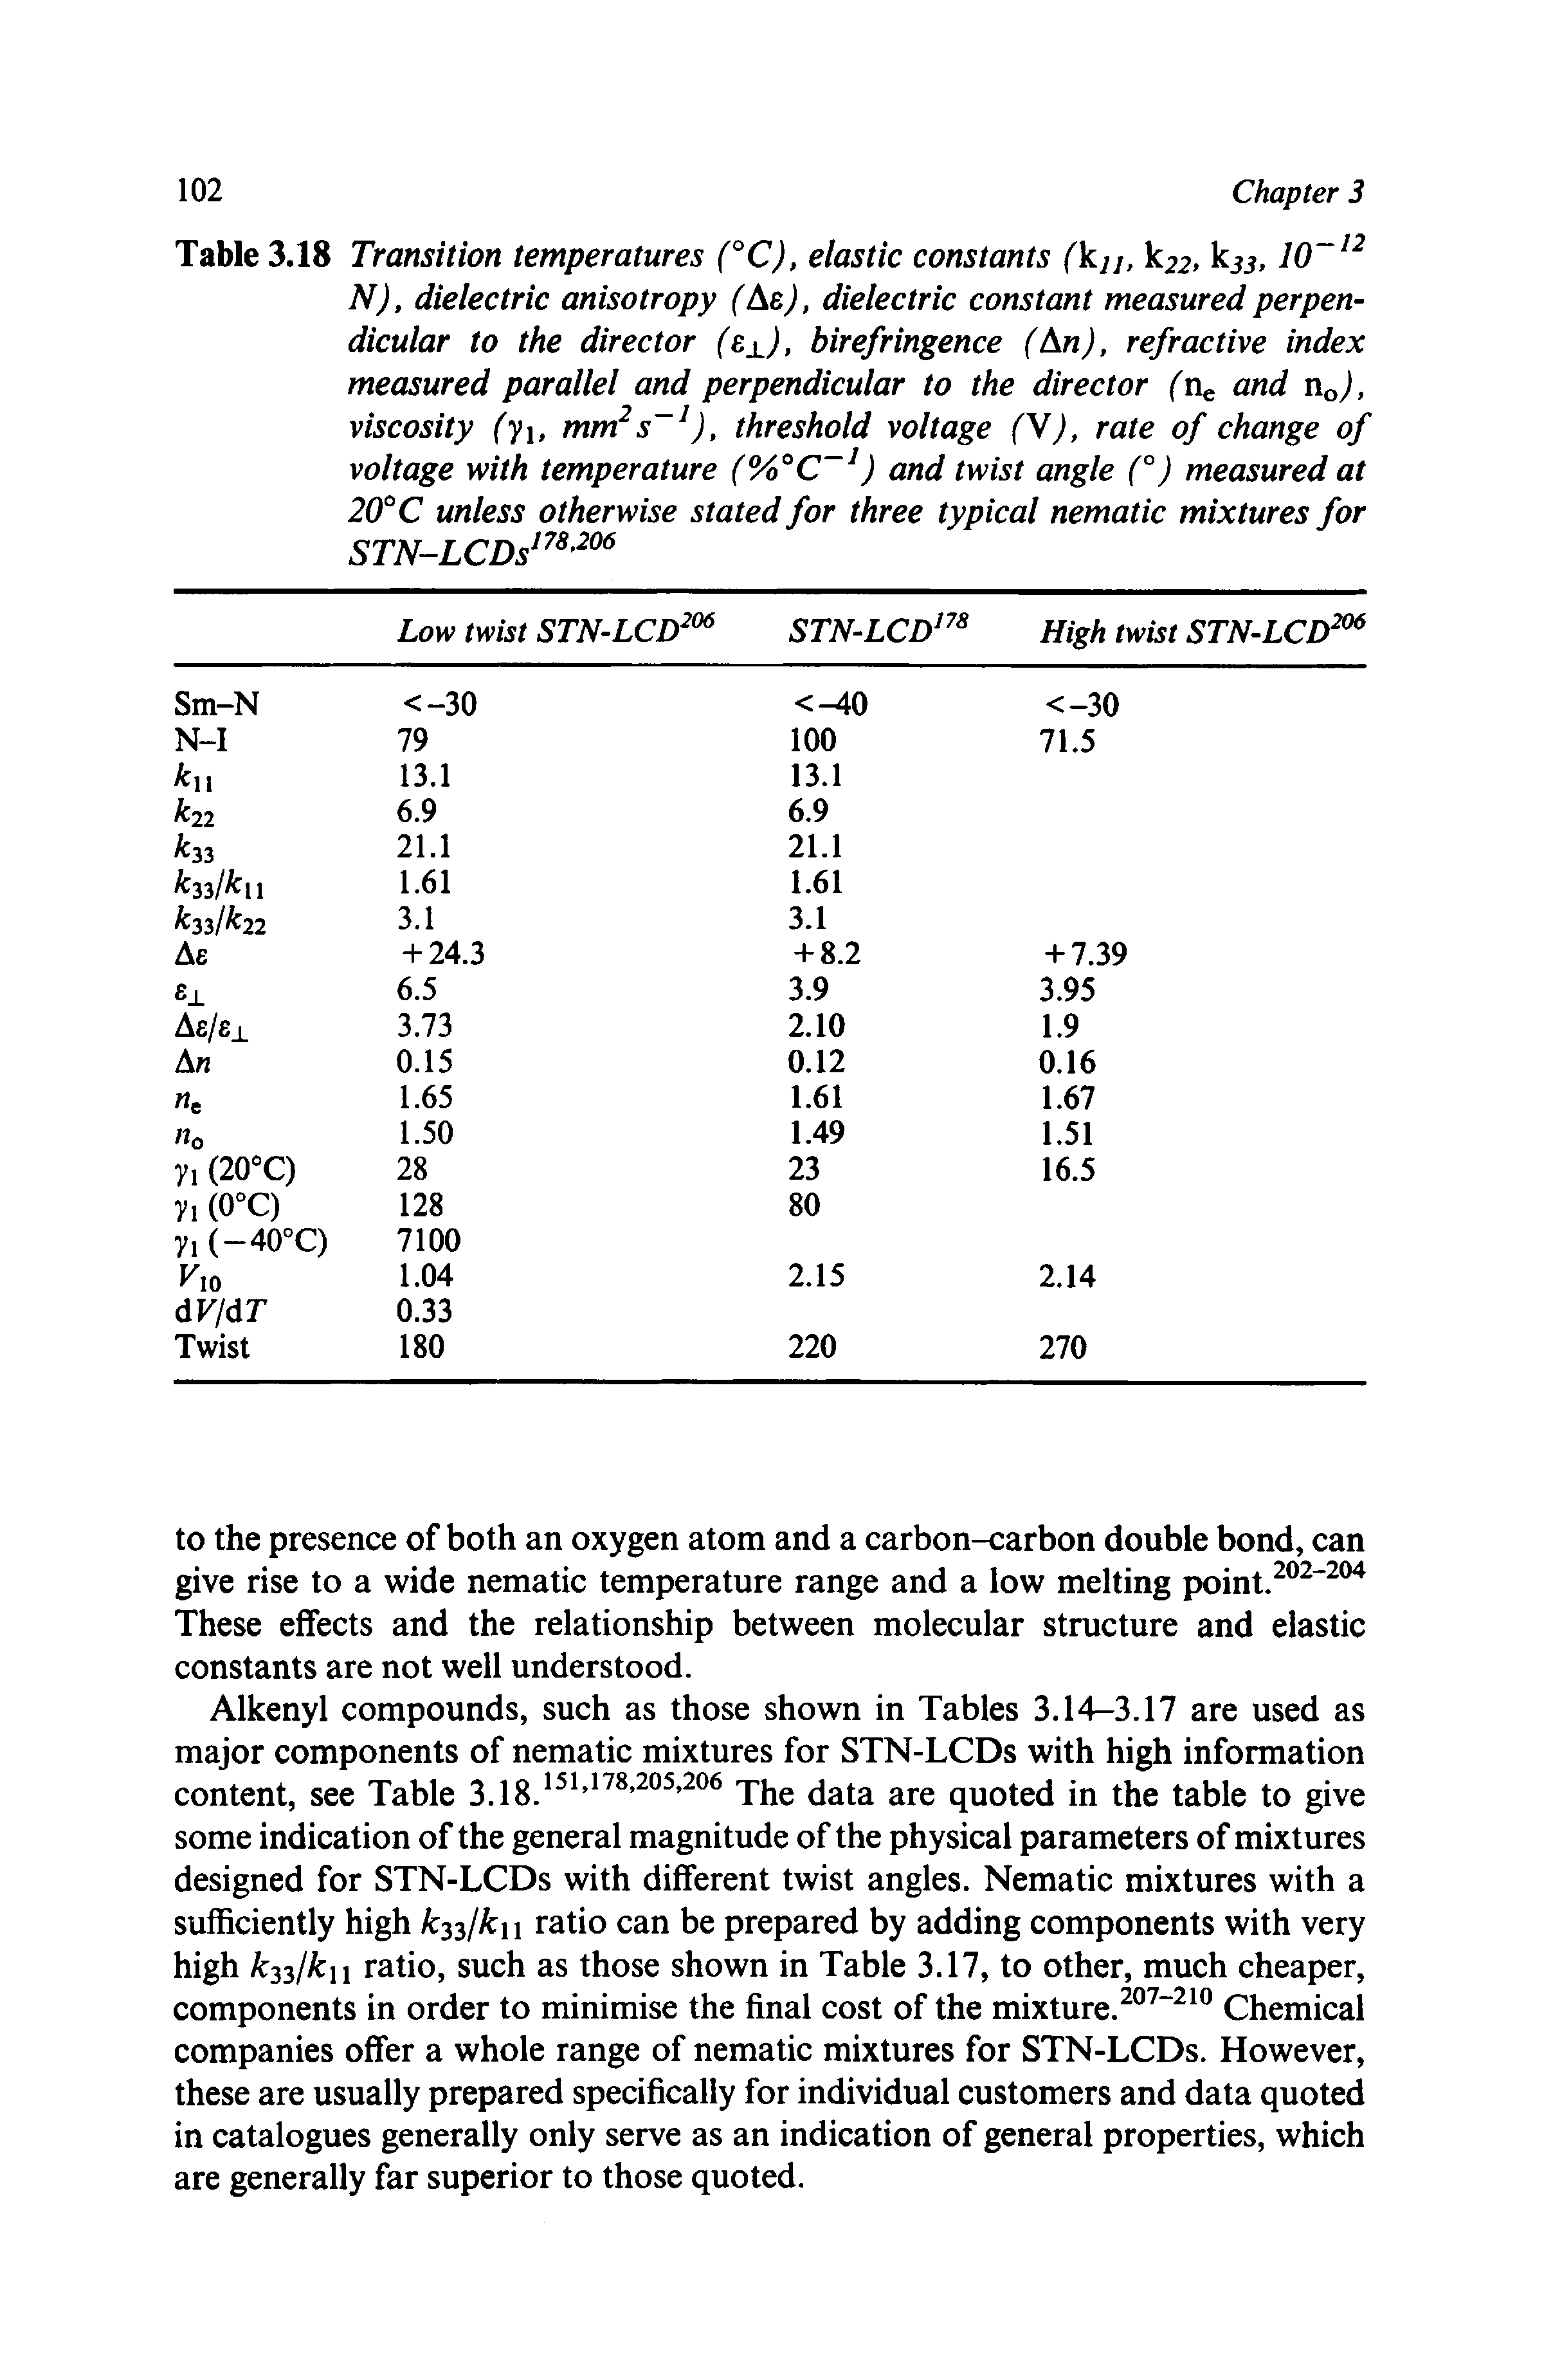 Table 3.18 Transition temperatures (°C), elastic constants (ku, k22, kjj, 10 N), dielectric anisotropy ( e), dielectric constant measured perpendicular to the director (b2.)> birefringence ( n), refractive index measured parallel and perpendicular to the director ( ng and xto), viscosity (yi, mm s ), threshold voltage (V), rate of change of voltage with temperature (%°C ) and twist angle (°) measured at 20° C unless otherwise stated for three typical nematic mixtures for STN-LCDs ...